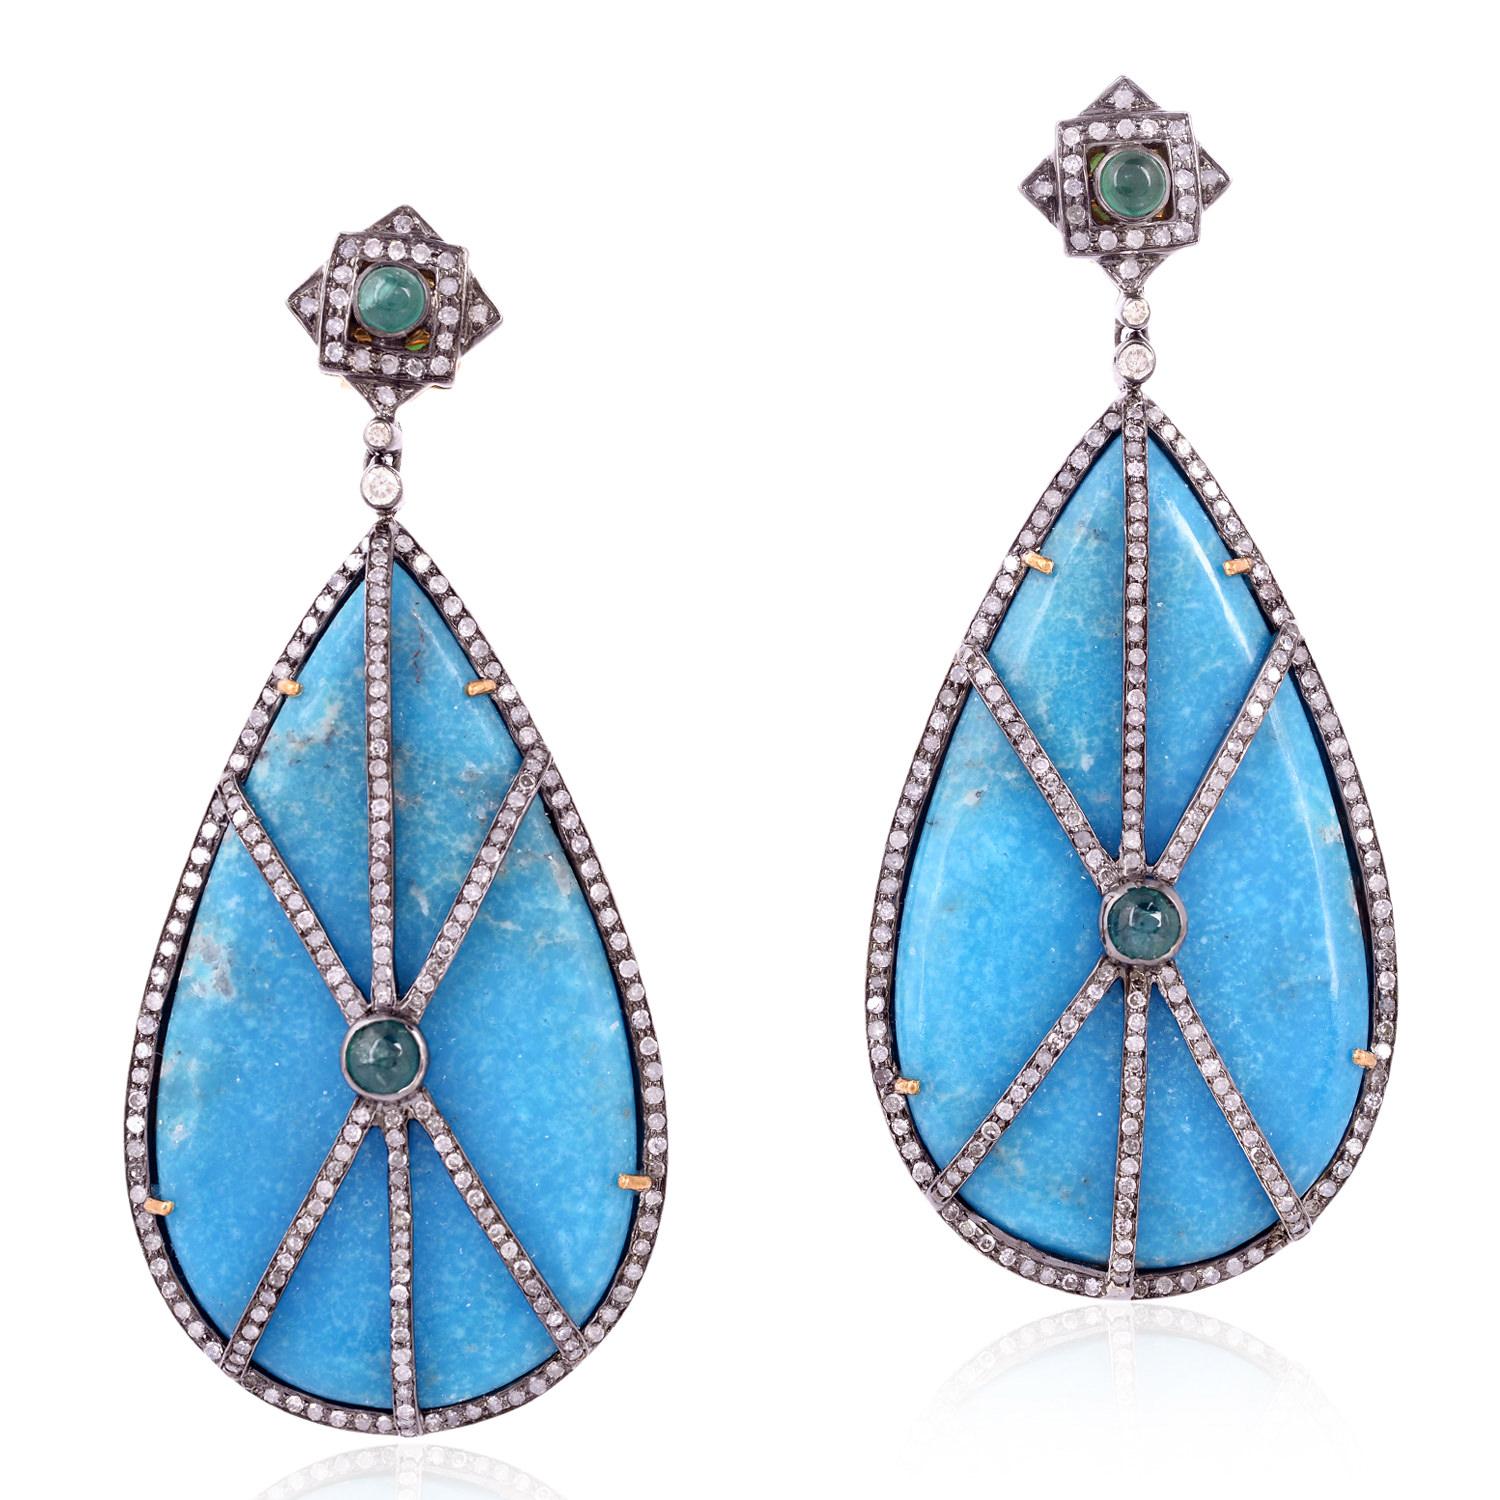 Mixed Cut Tear Drop Shaped Turquoise Dangle Earrings Equipped With Emeralds & Diamonds For Sale